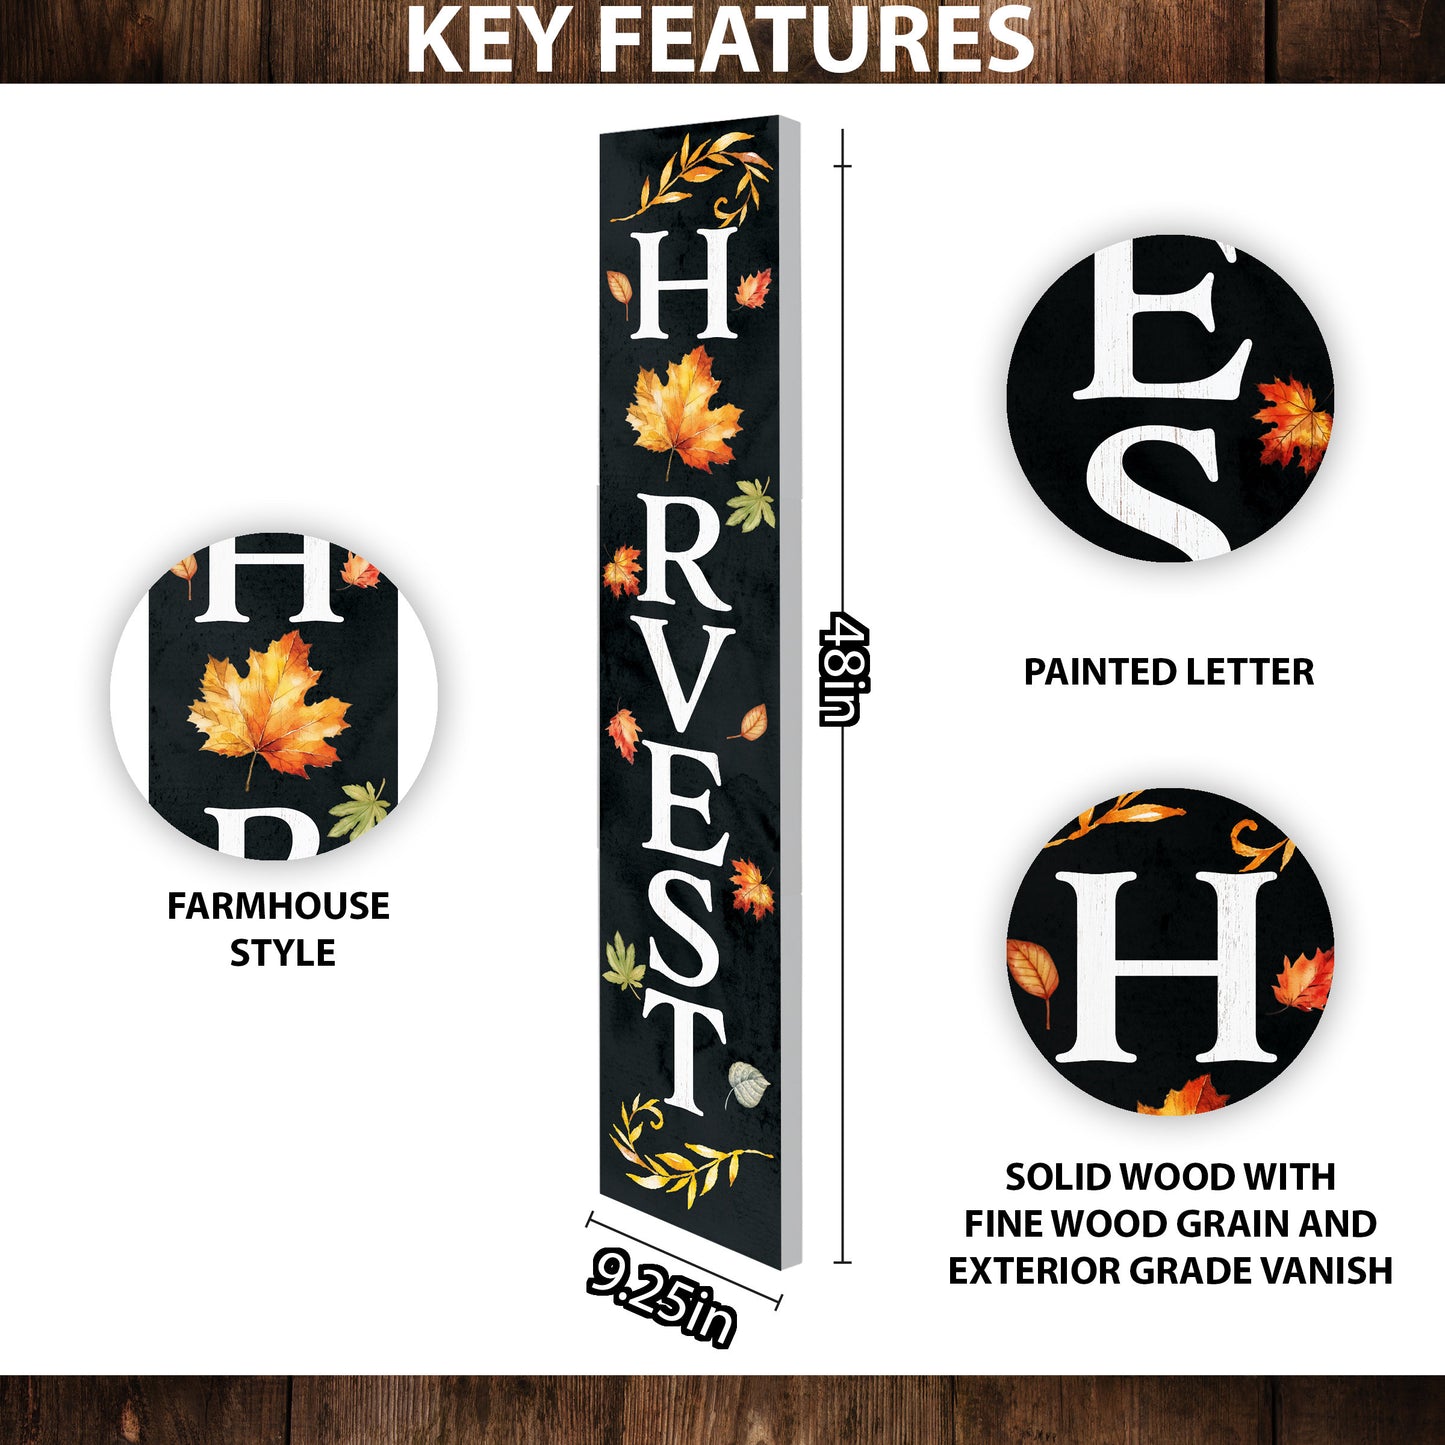 48in "Harvest" Fall Porch Sign - Front Door Decor for Autumn Celebrations